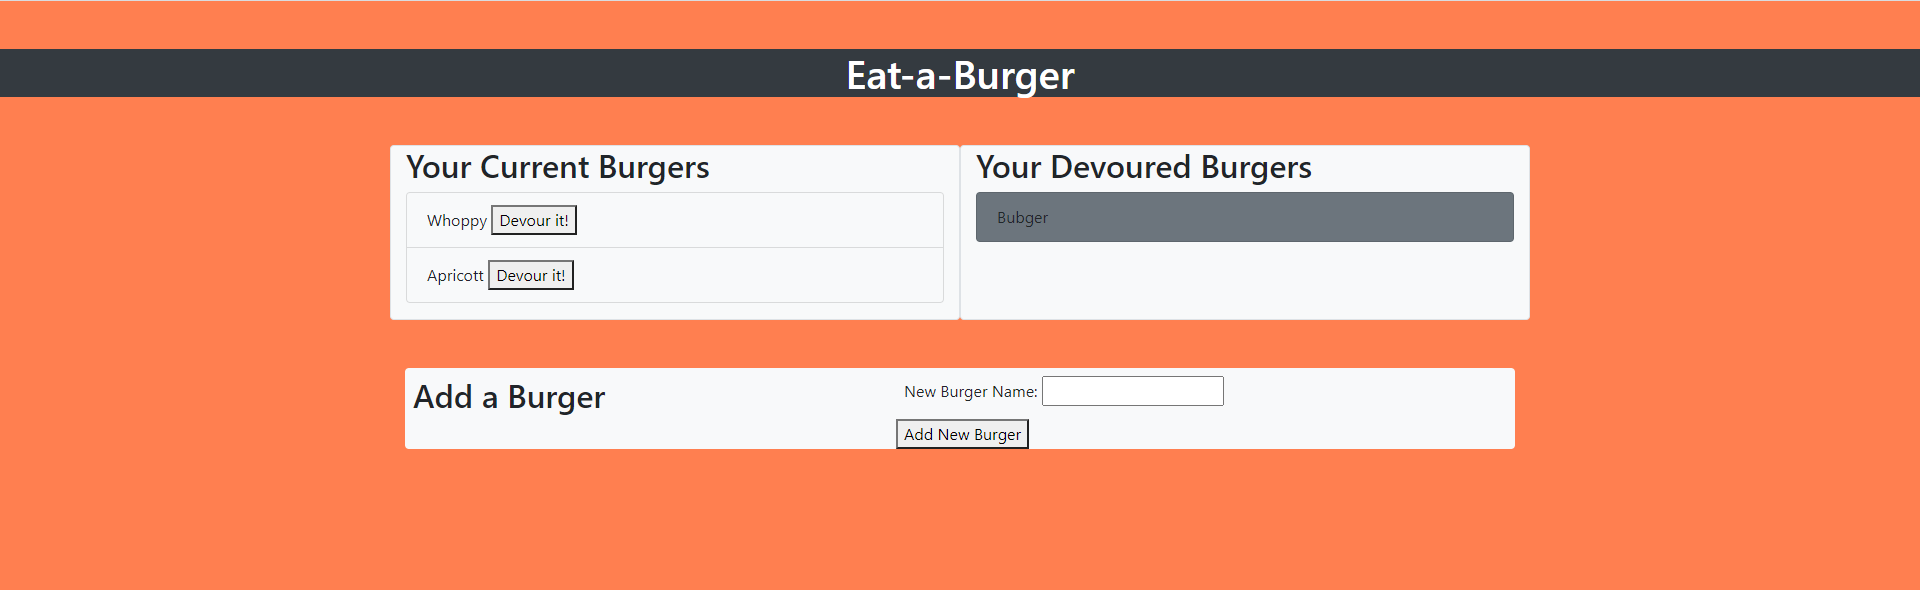 The splash page for Eat-A-Burger